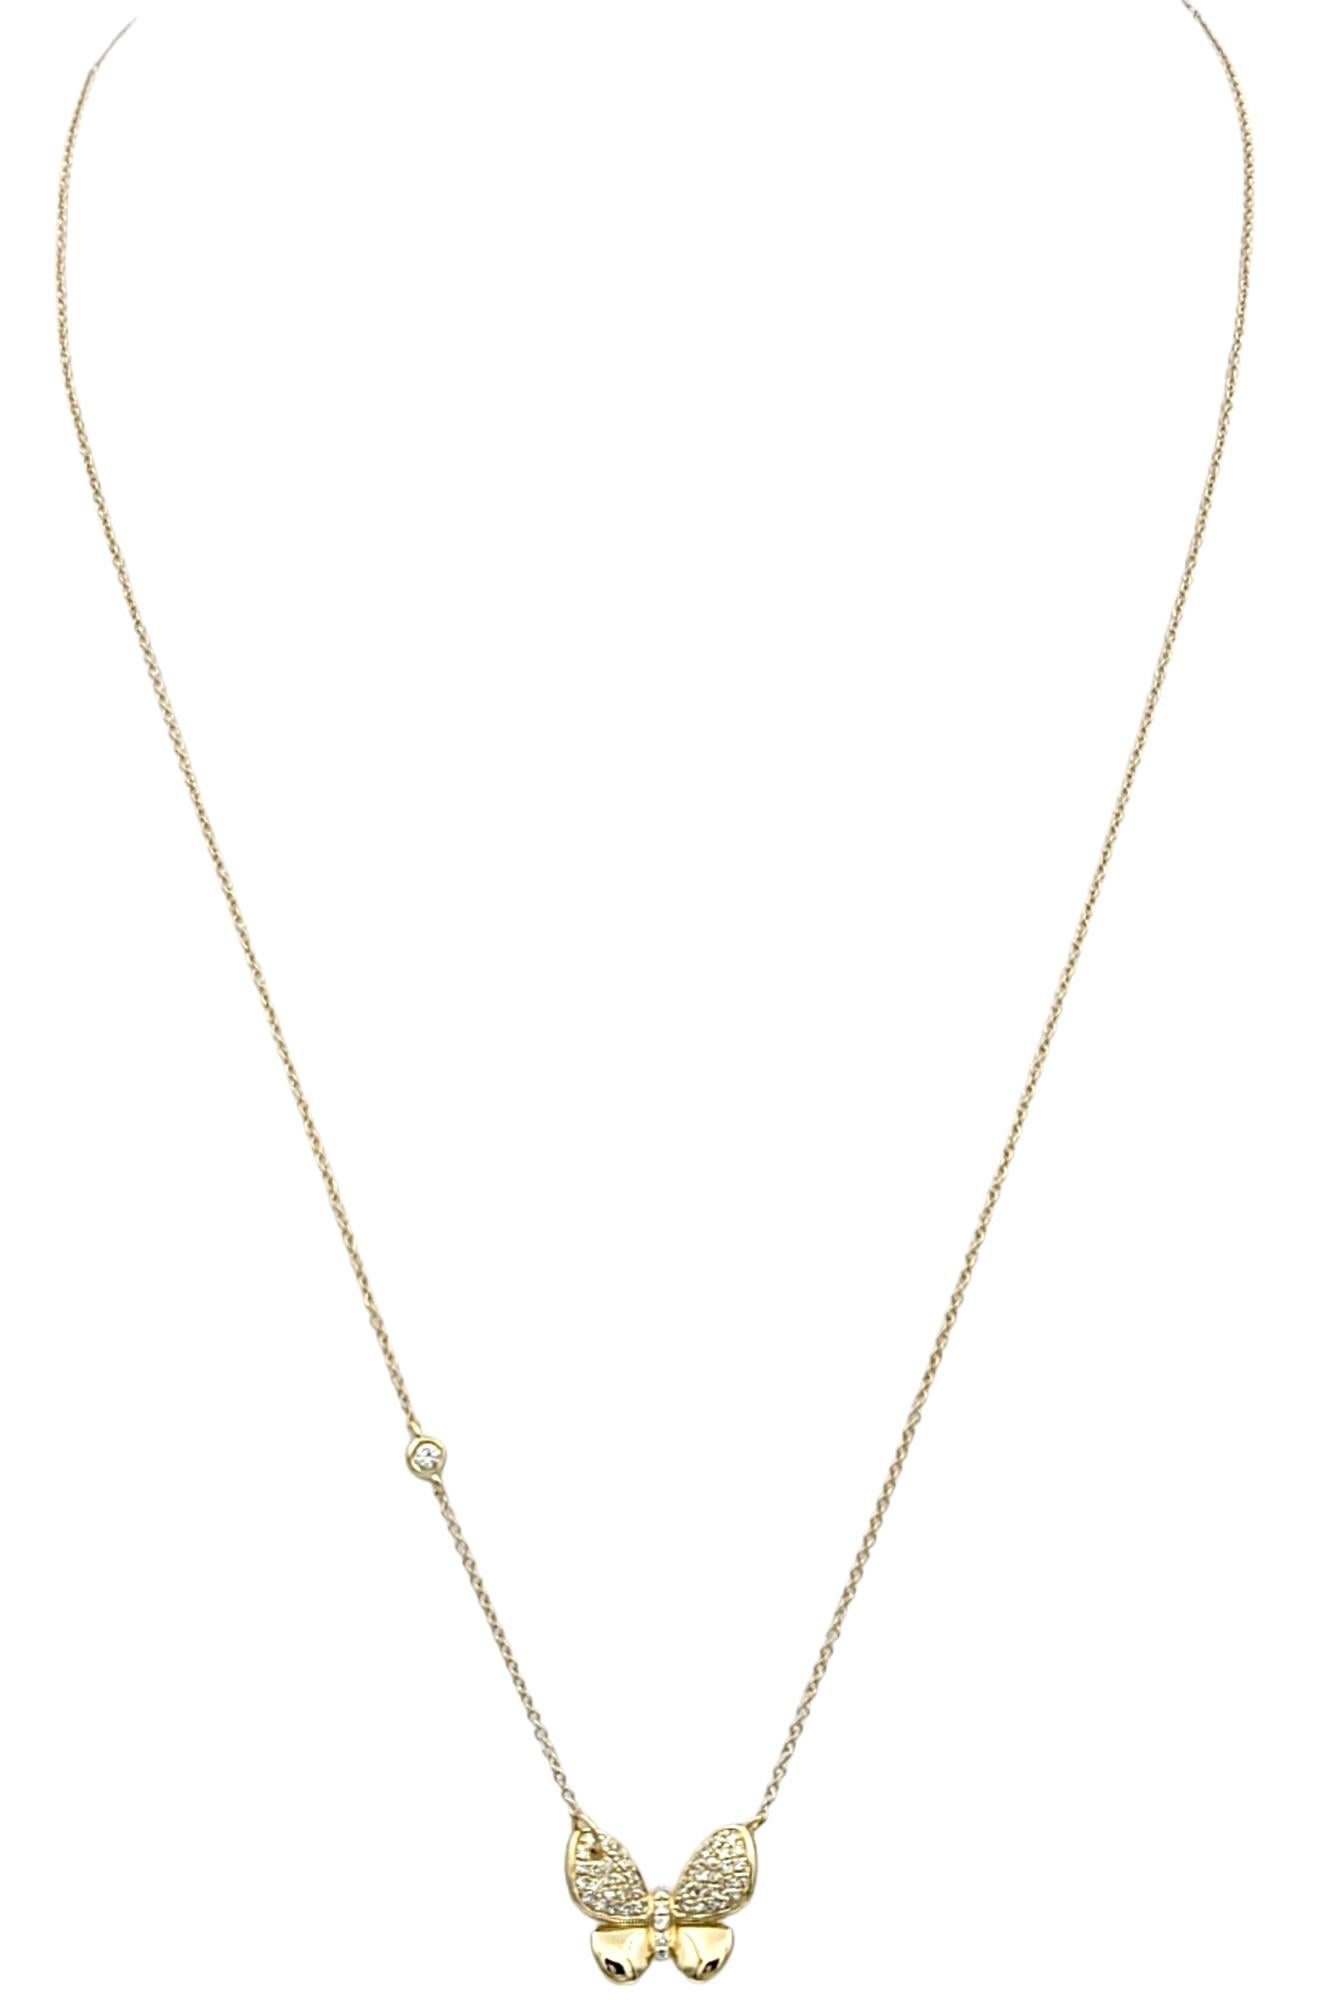 Contemporary Effy Pavé Diamond Butterfly Pendant Necklace Set in 14 Karat Yellow Gold For Sale